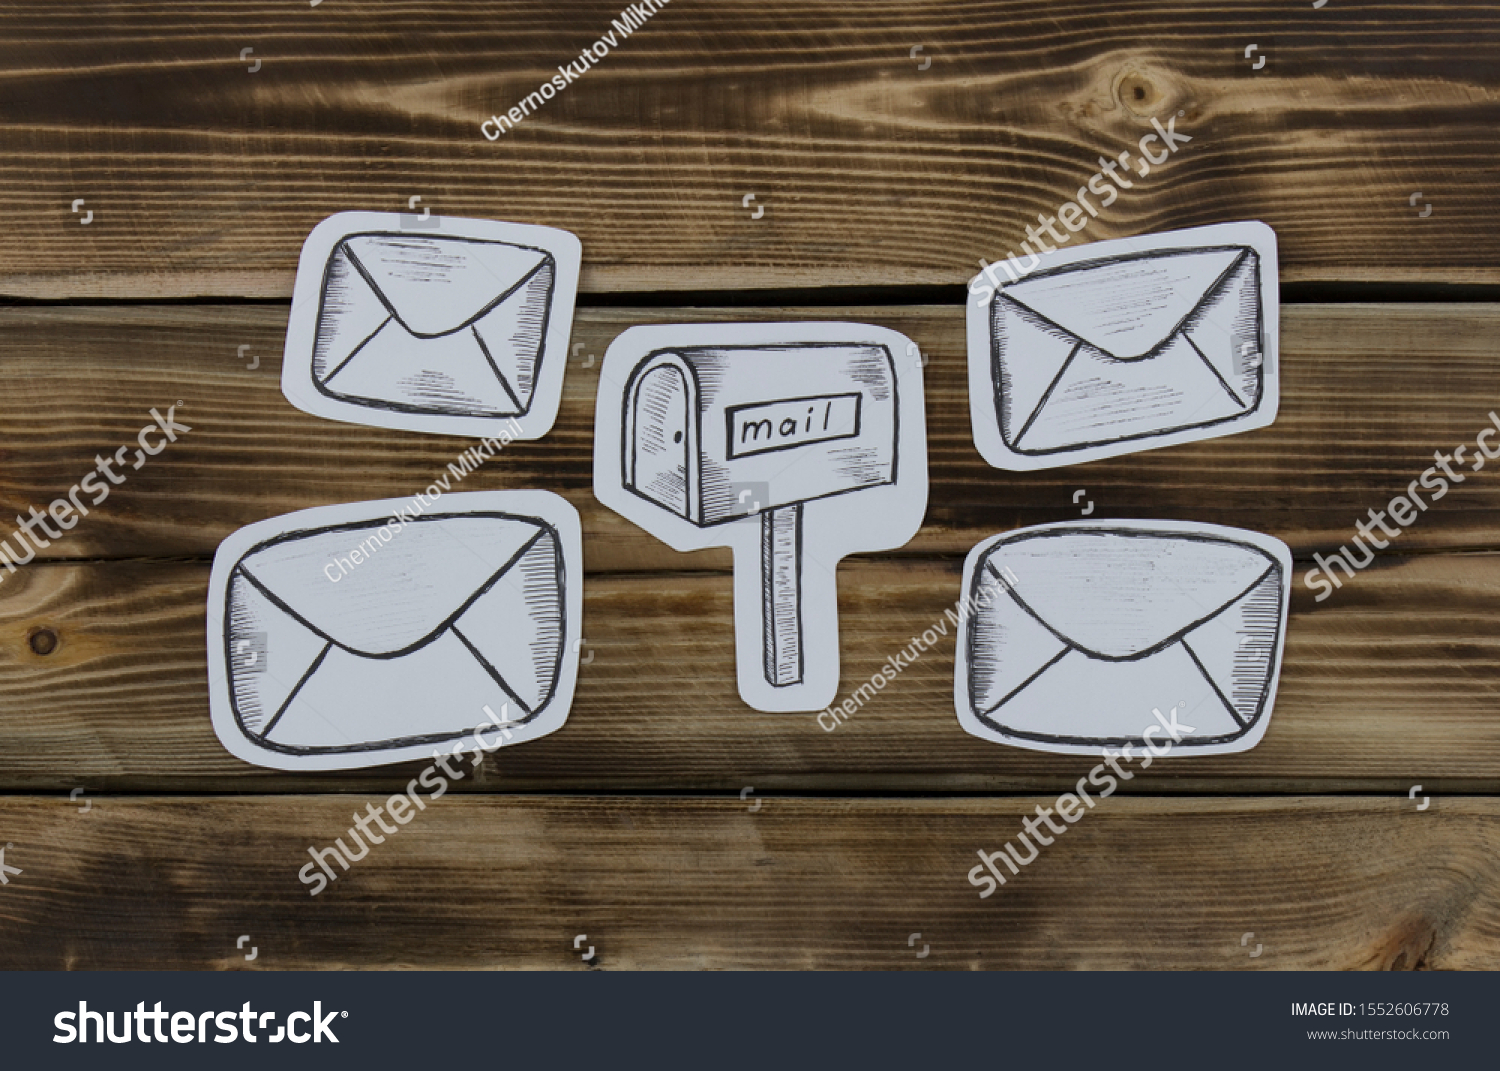 Paper sketched sketches with mail-themed letters on wooden #1552606778